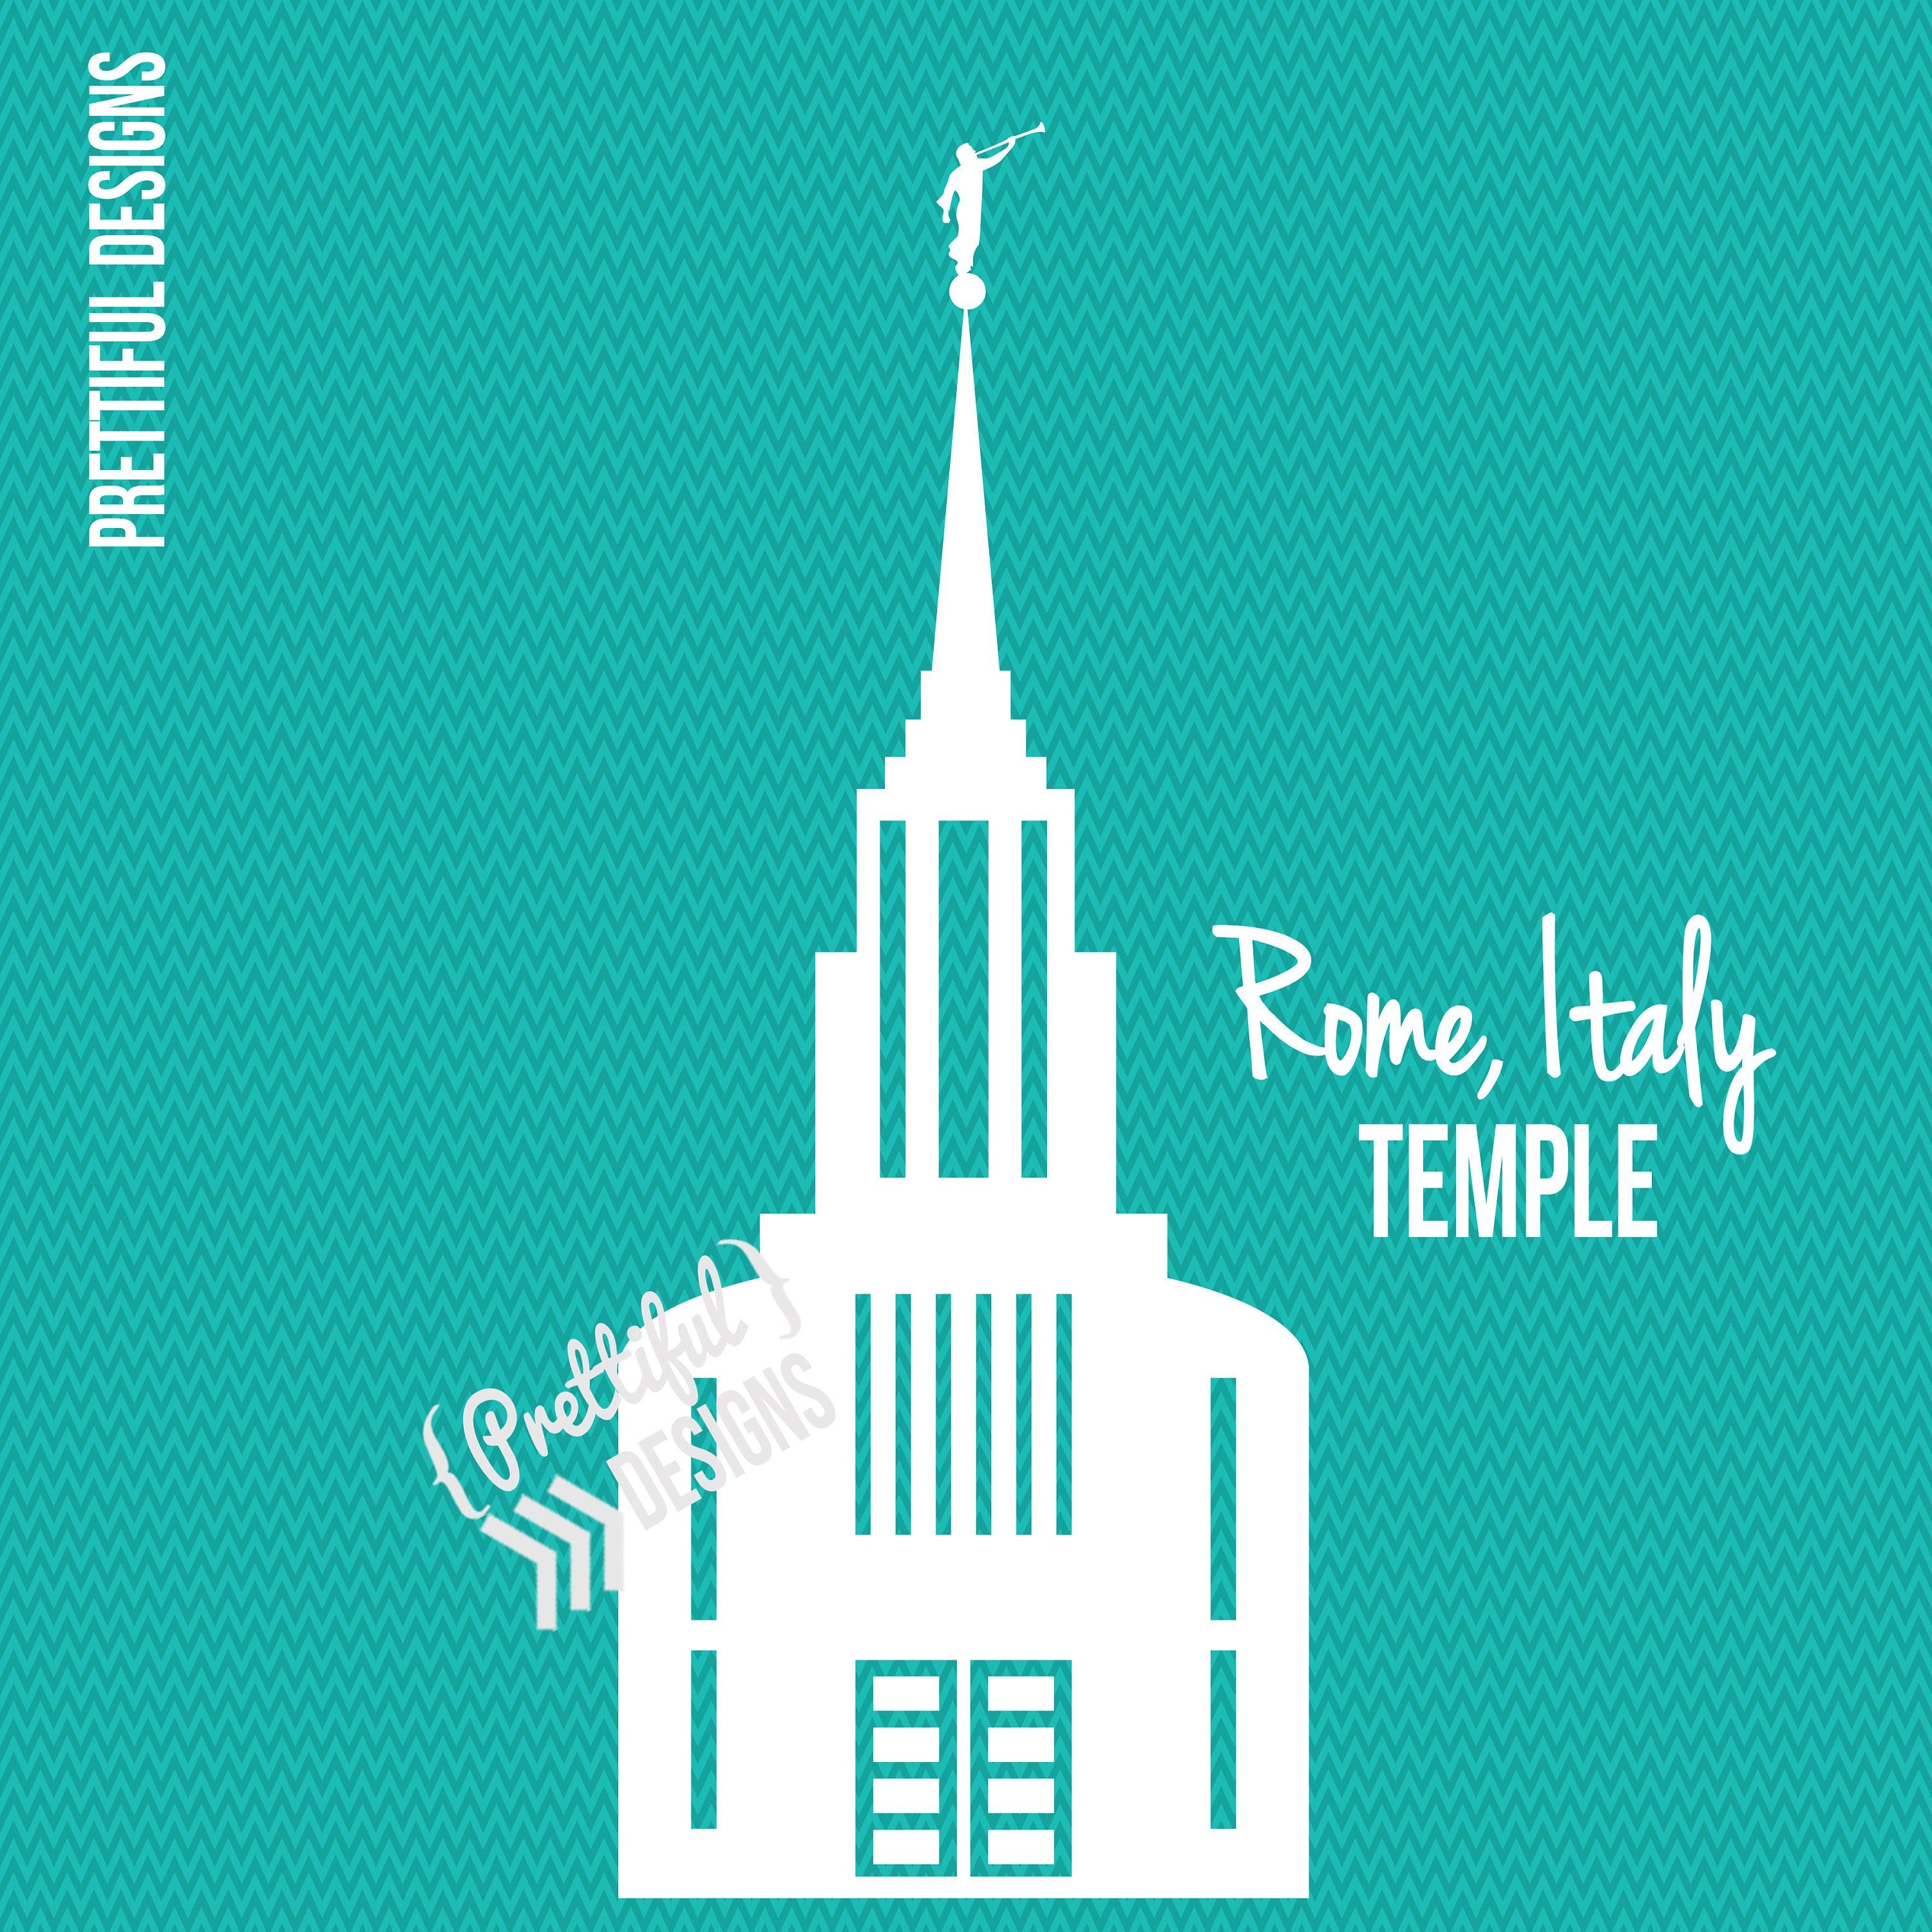 Download Lds Temple Vector at Vectorified.com | Collection of Lds ...